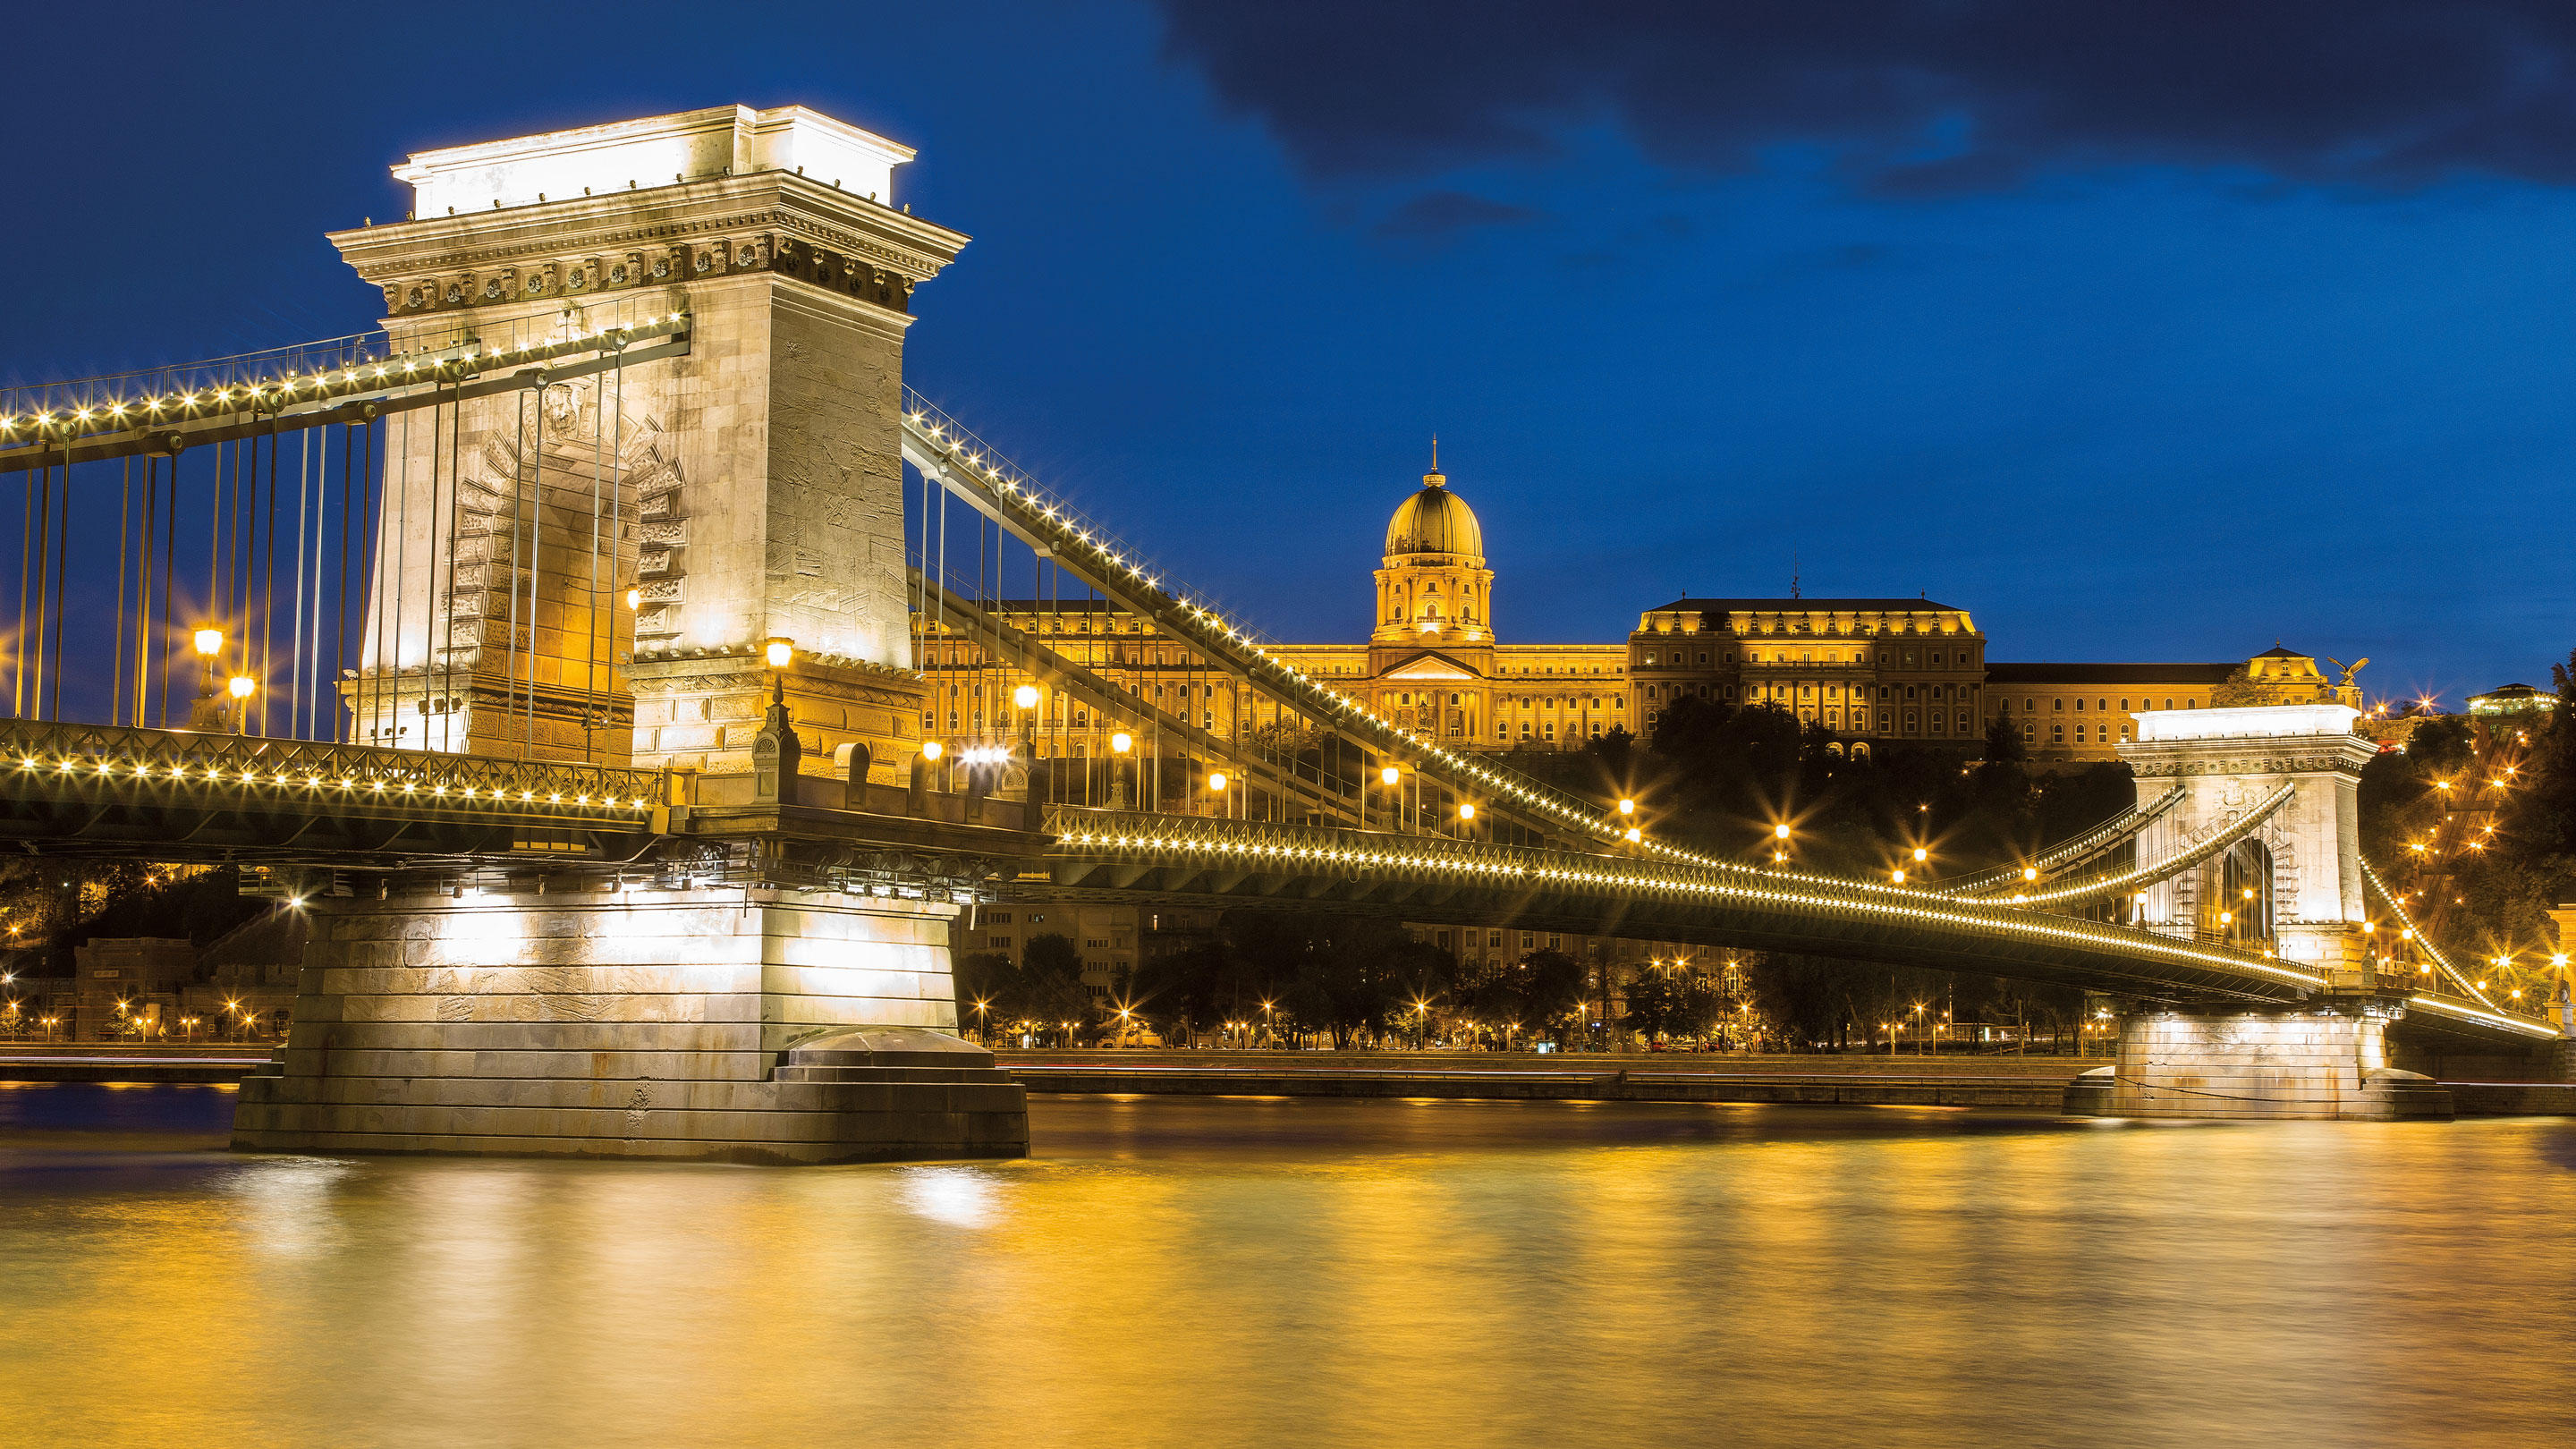 Learn more about our activities in Hungary.